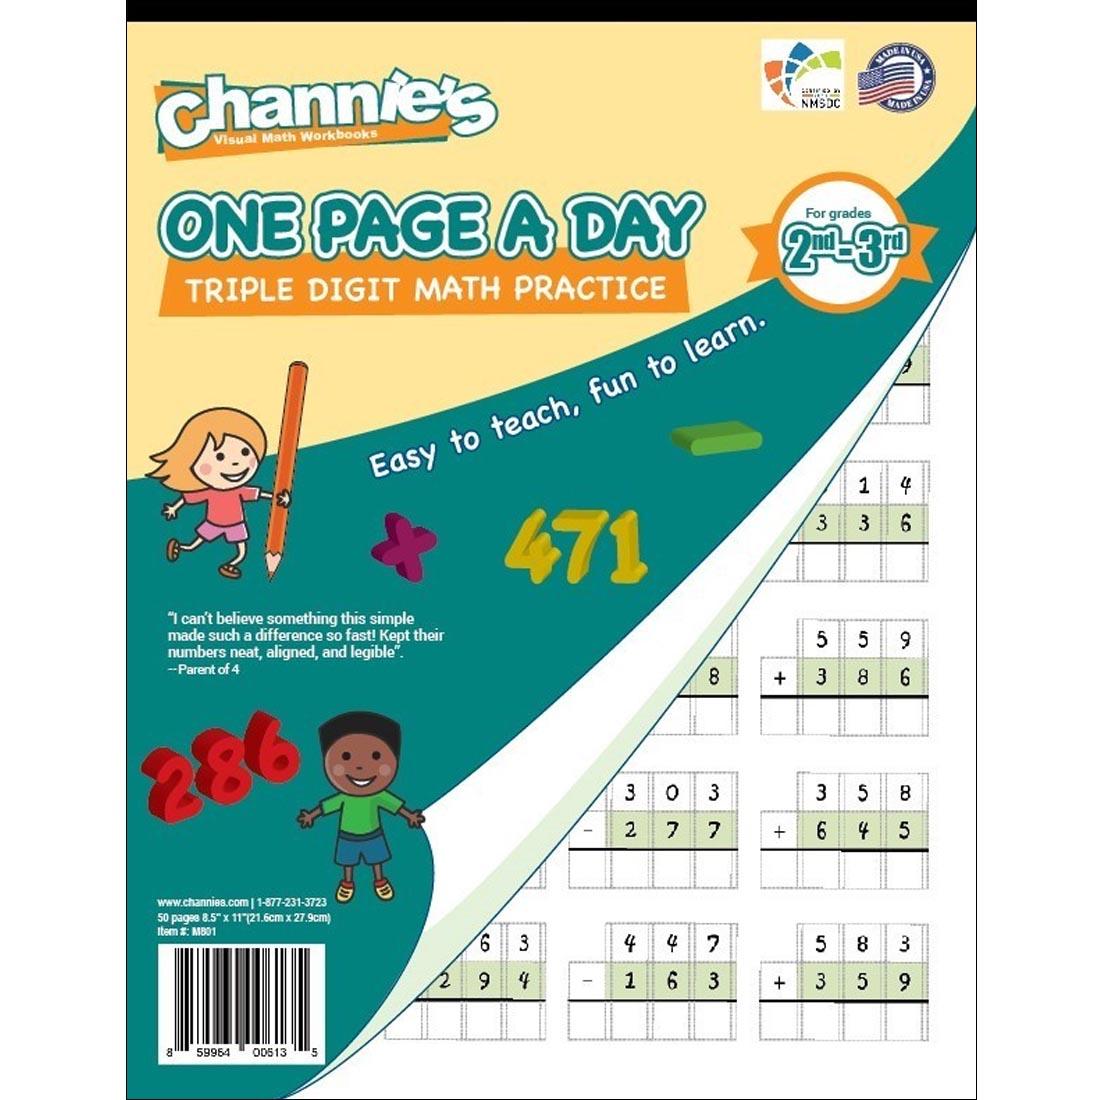 Channie's Visual Math Workbook: One Page a Day Triple Digit Math Practice